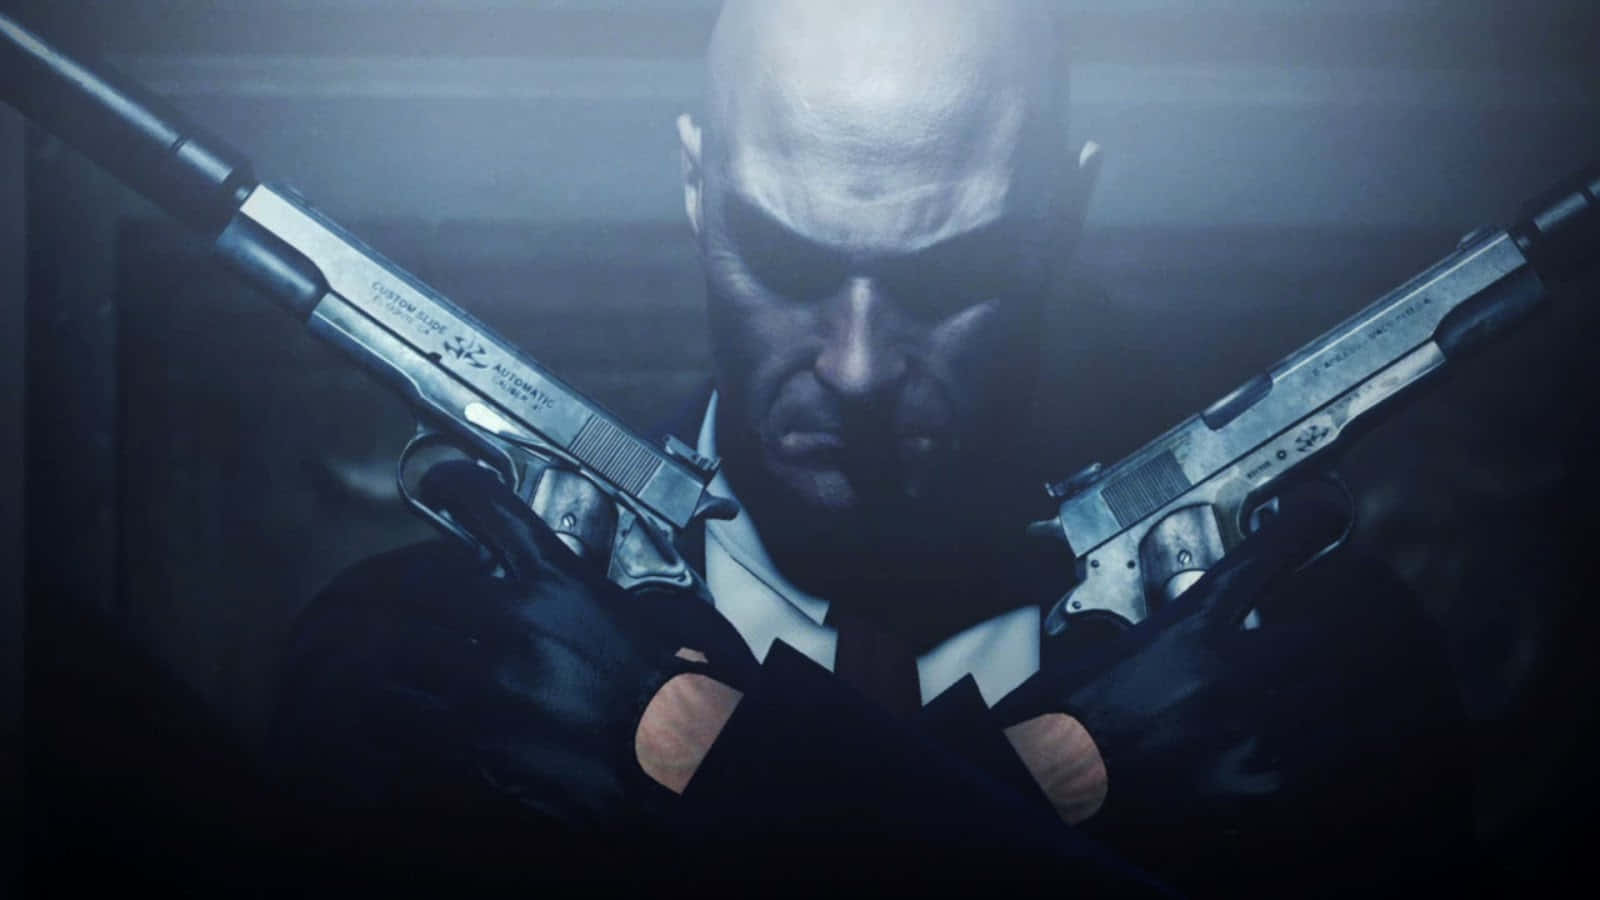 Take on the role of Agent 47 in Hitman Absolution.